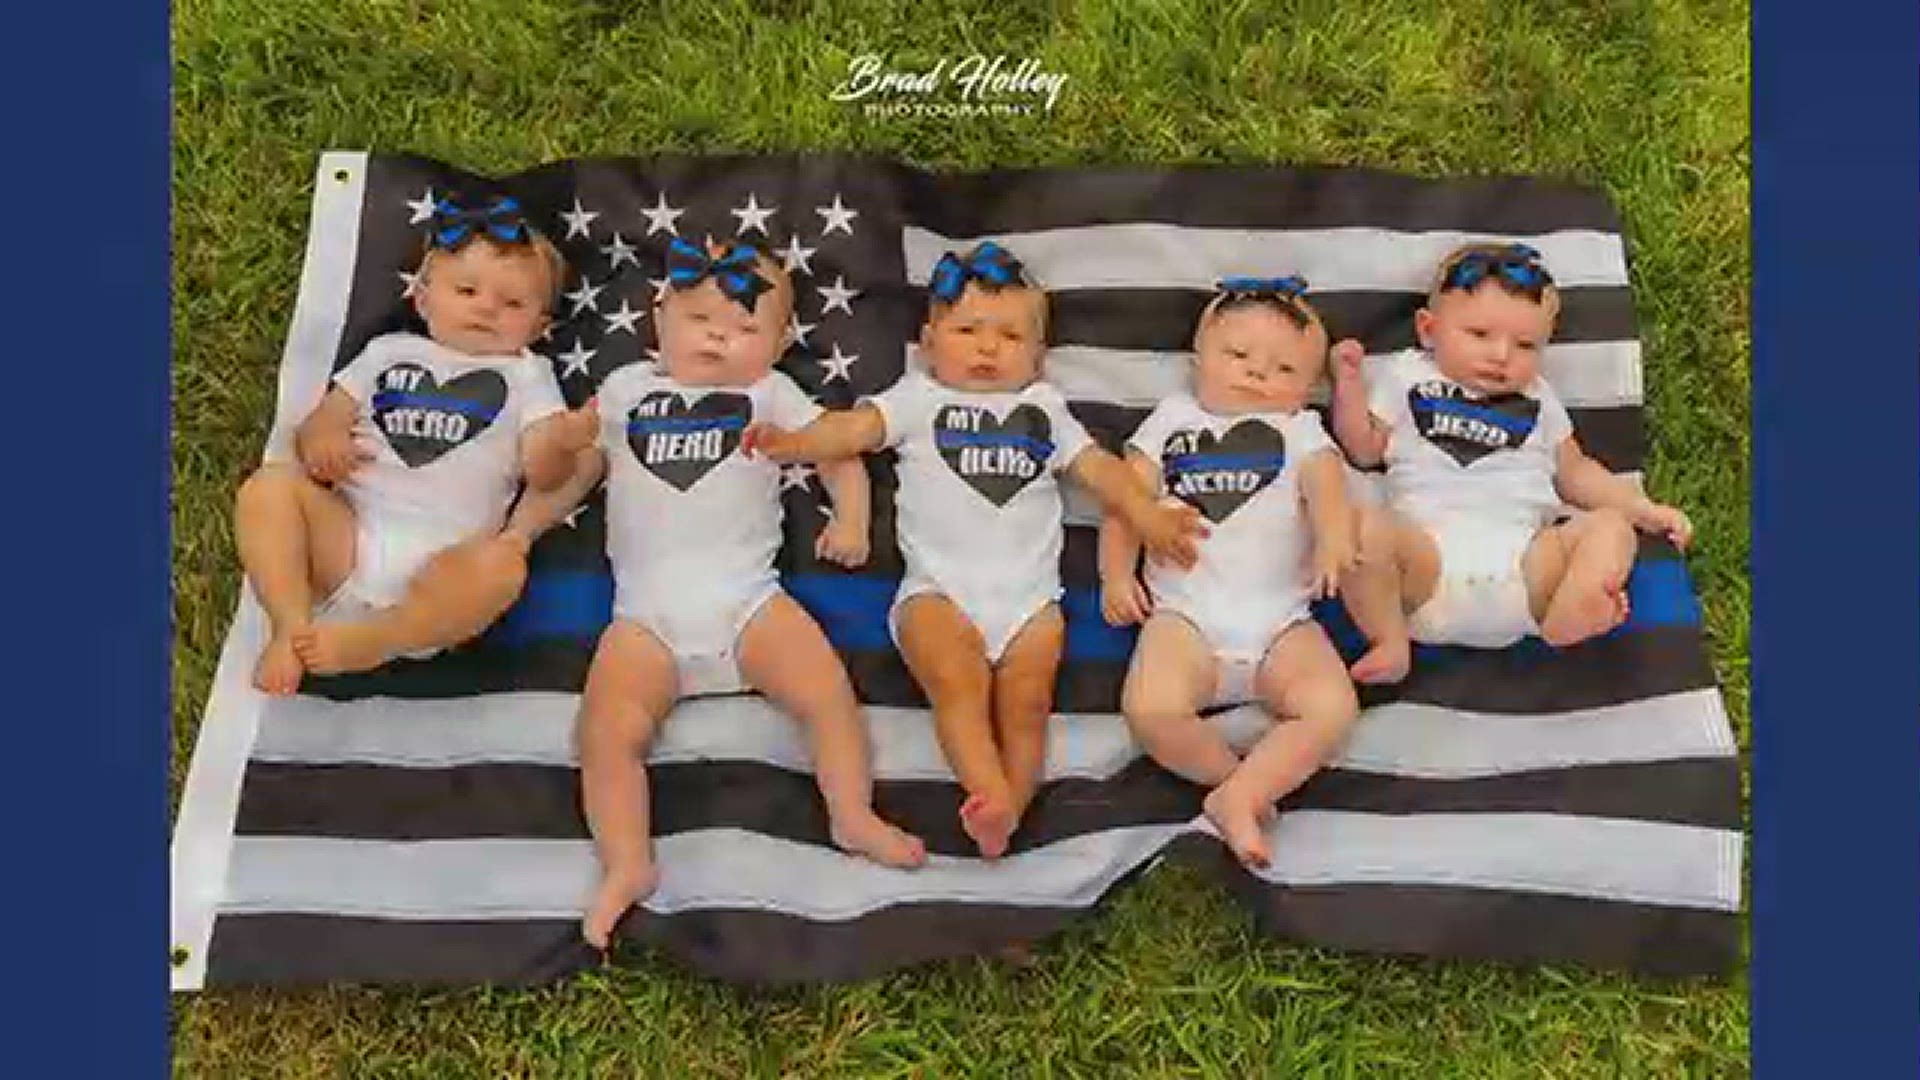 Four deputies posed with their newborn daughters and even the sheriff got in on the action with his new granddaughter.